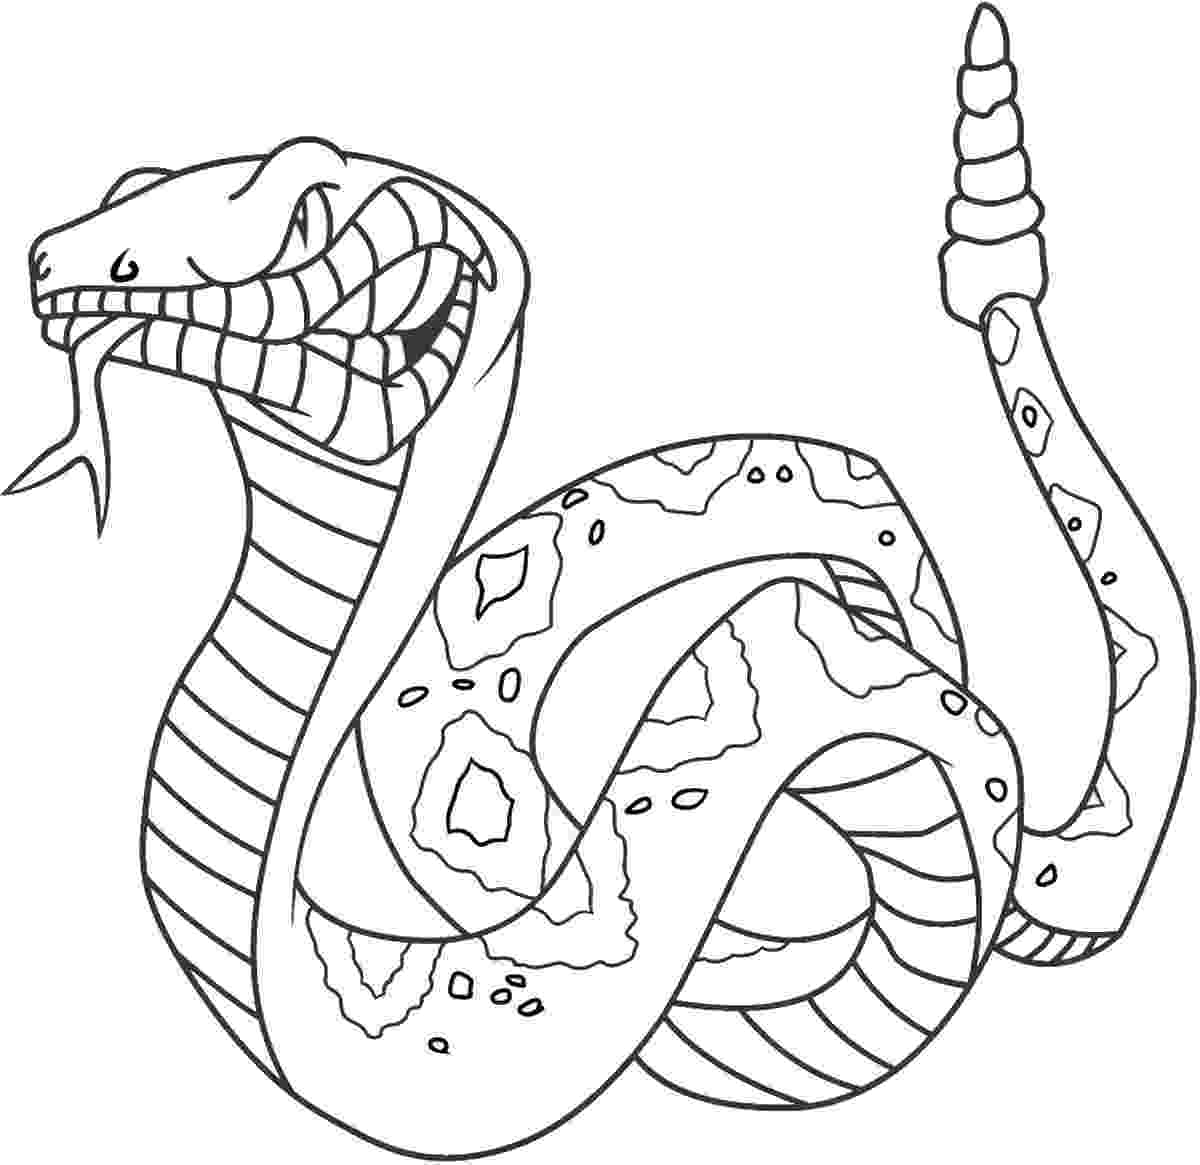 pictures of snakes to color free printable snake coloring pages for kids snakes to of pictures color 